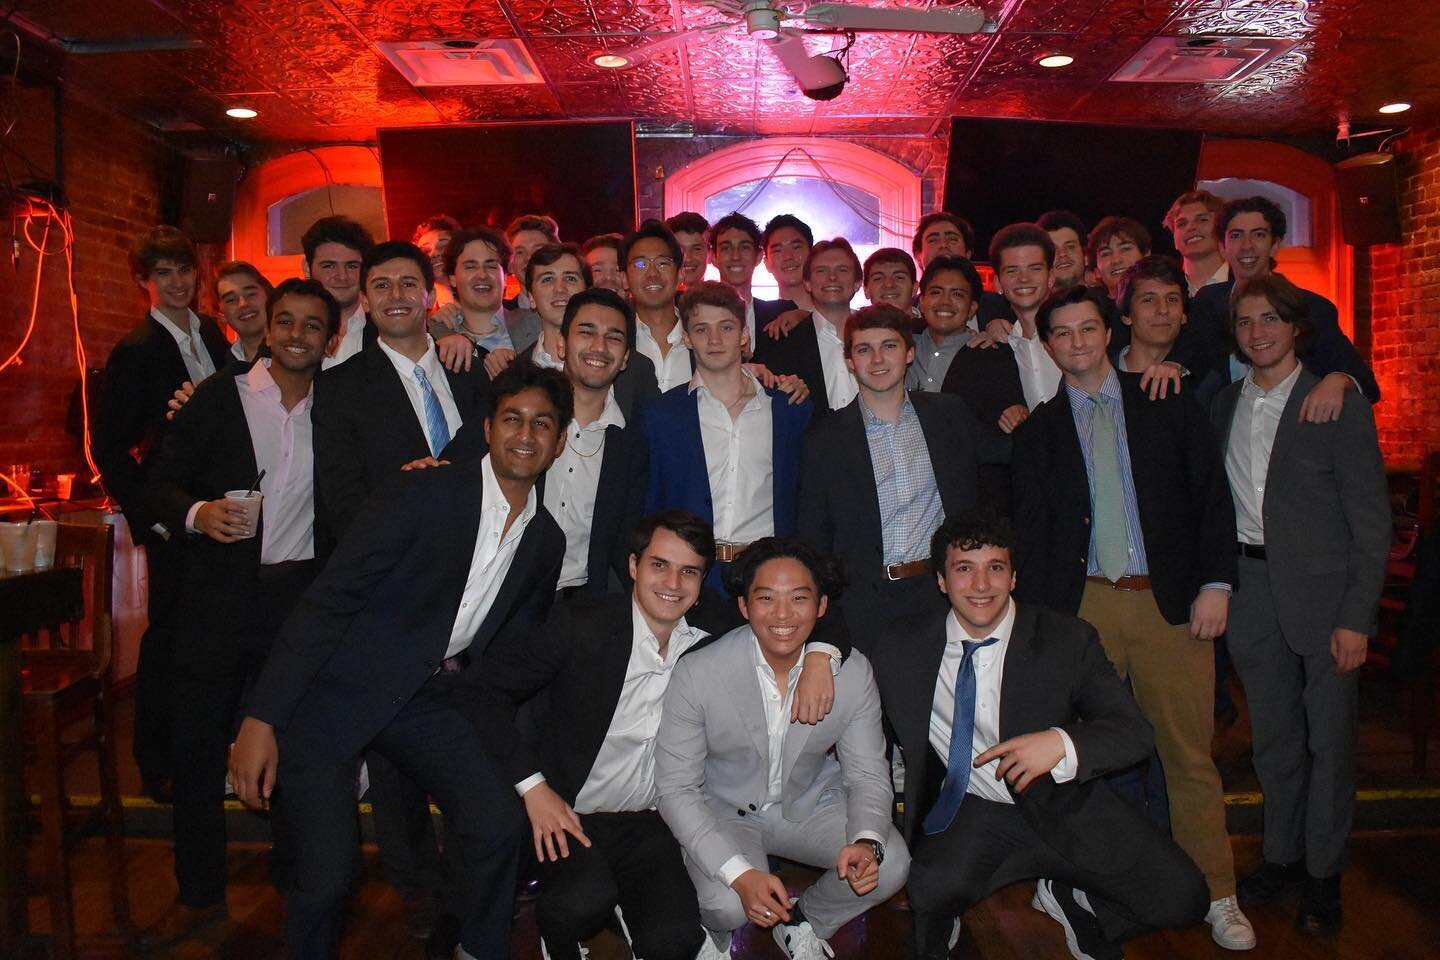 Formally closing the semester out 

Thank you to all the brothers and dates for a spectacular event